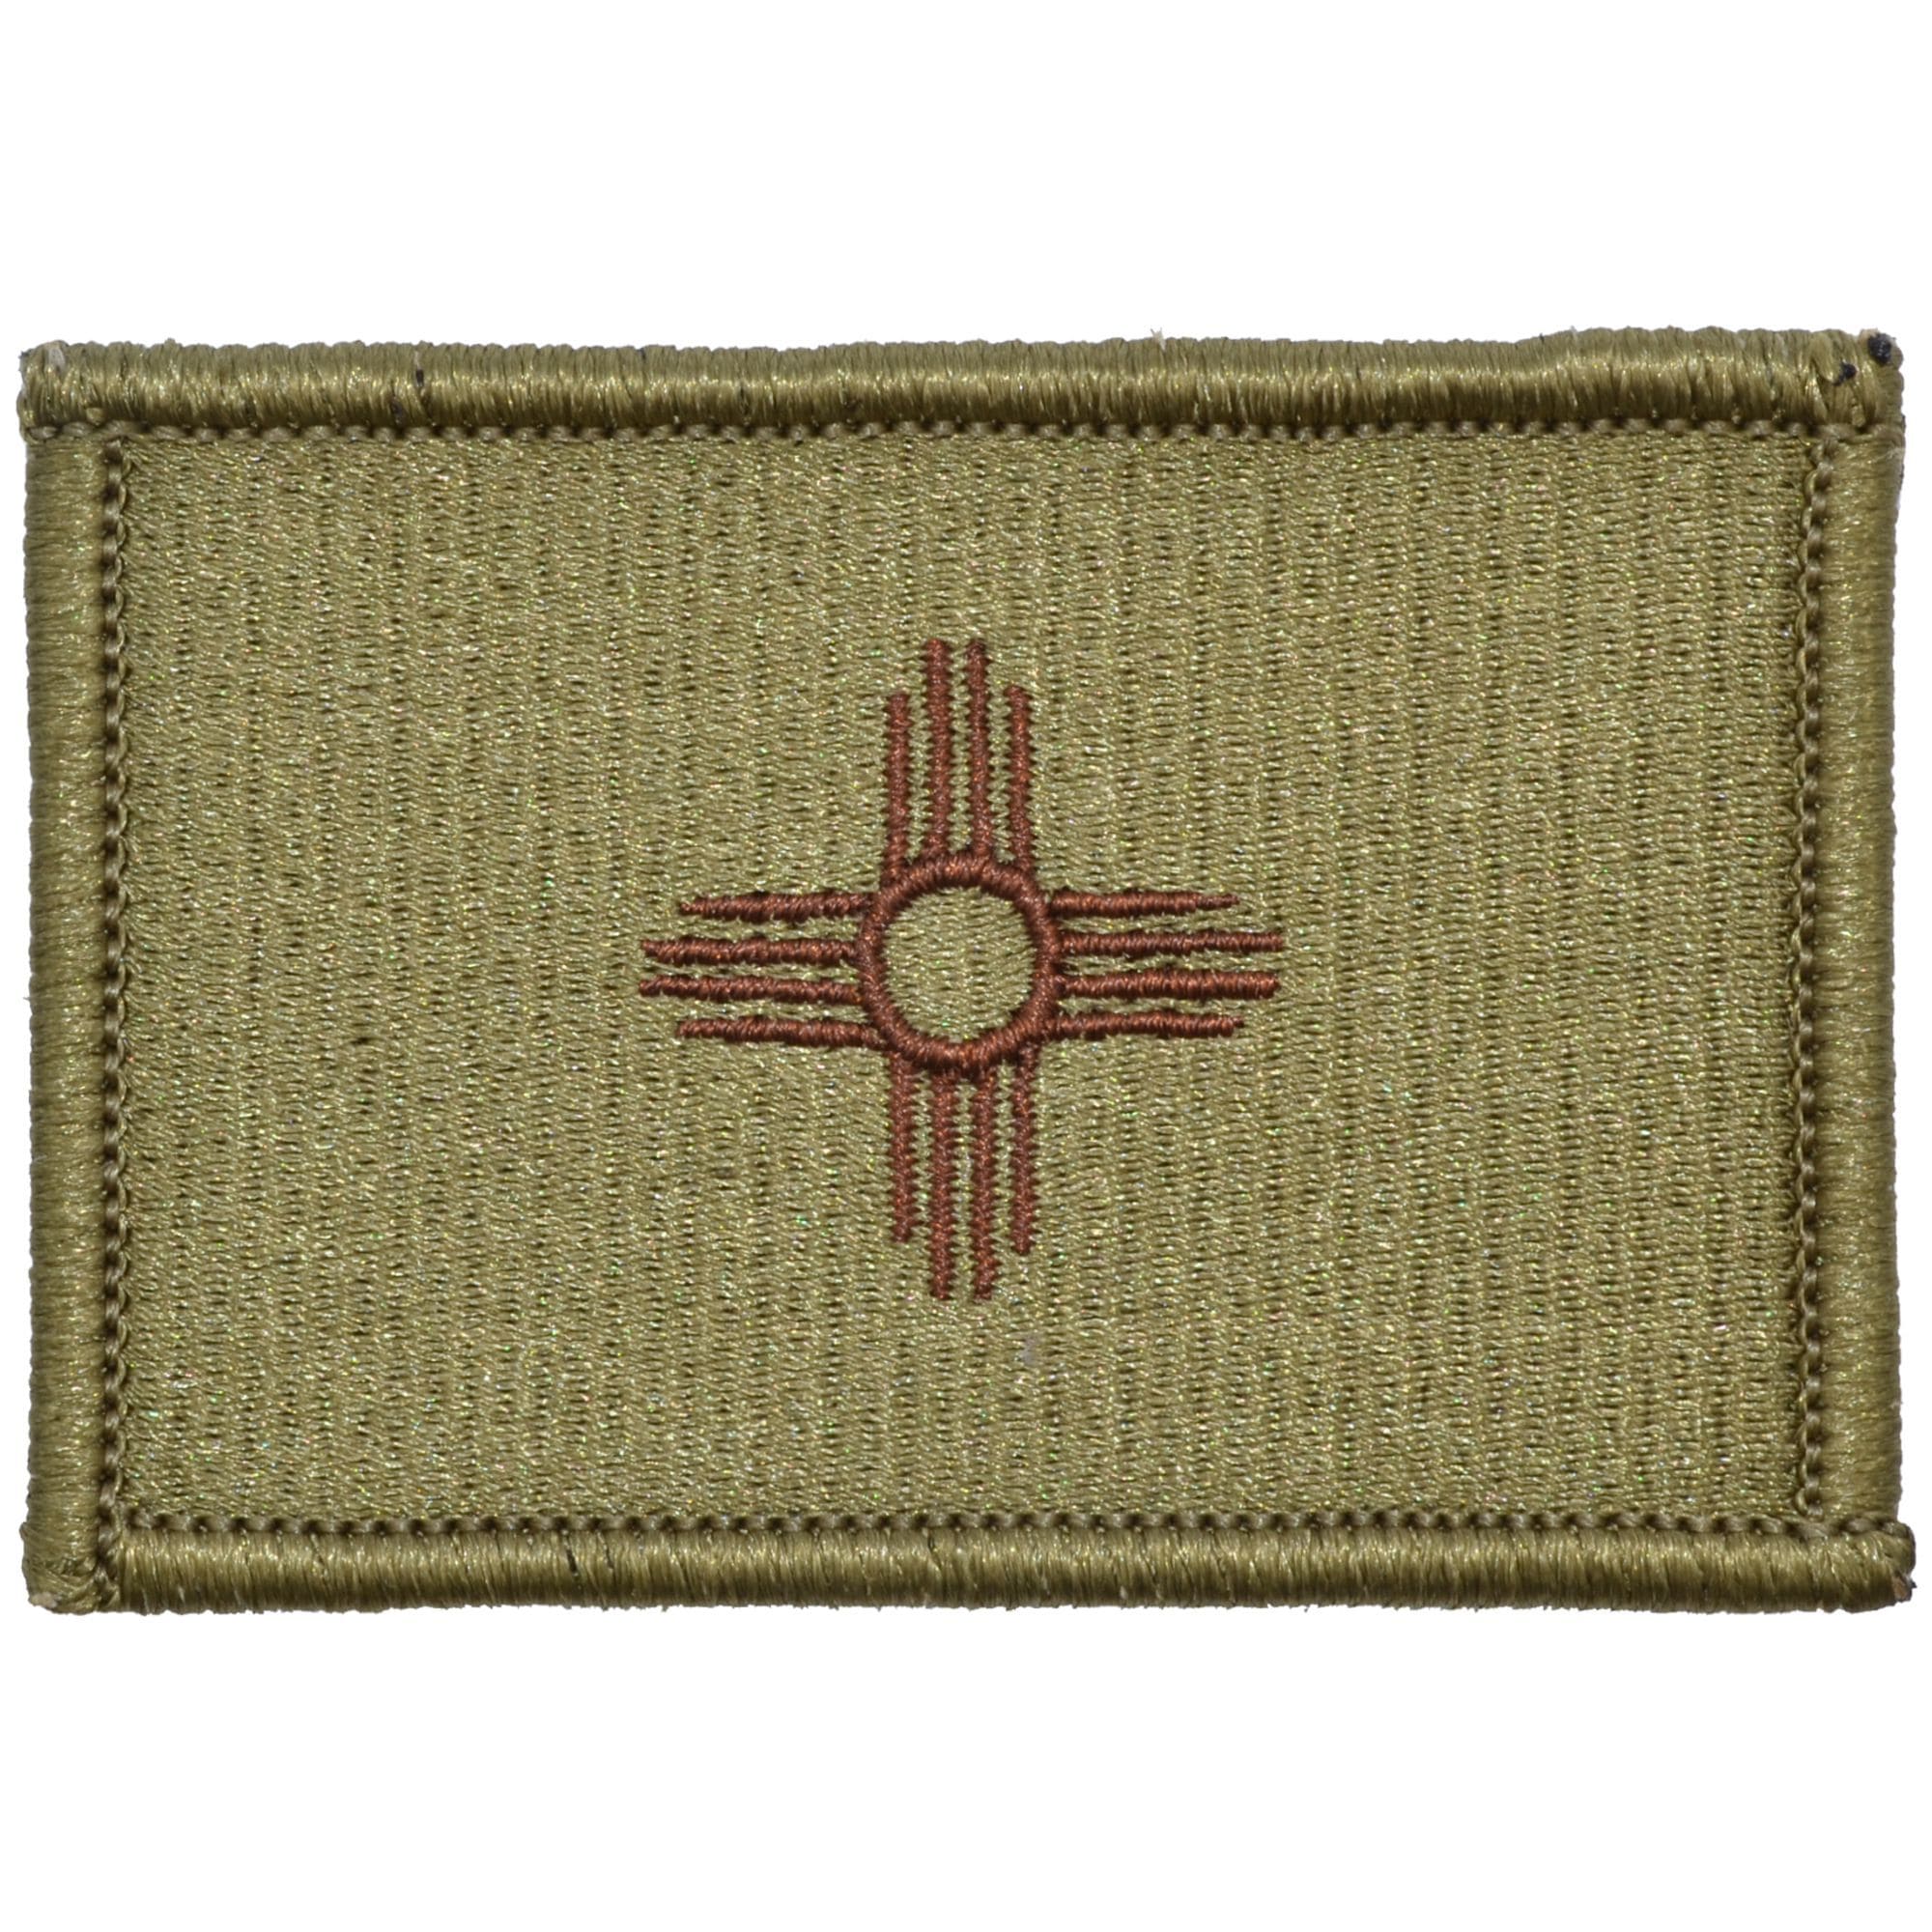 Tactical Gear Junkie Insignia New Mexico Flag Fully Embroidered Patch - USAF OCP/Scorpion